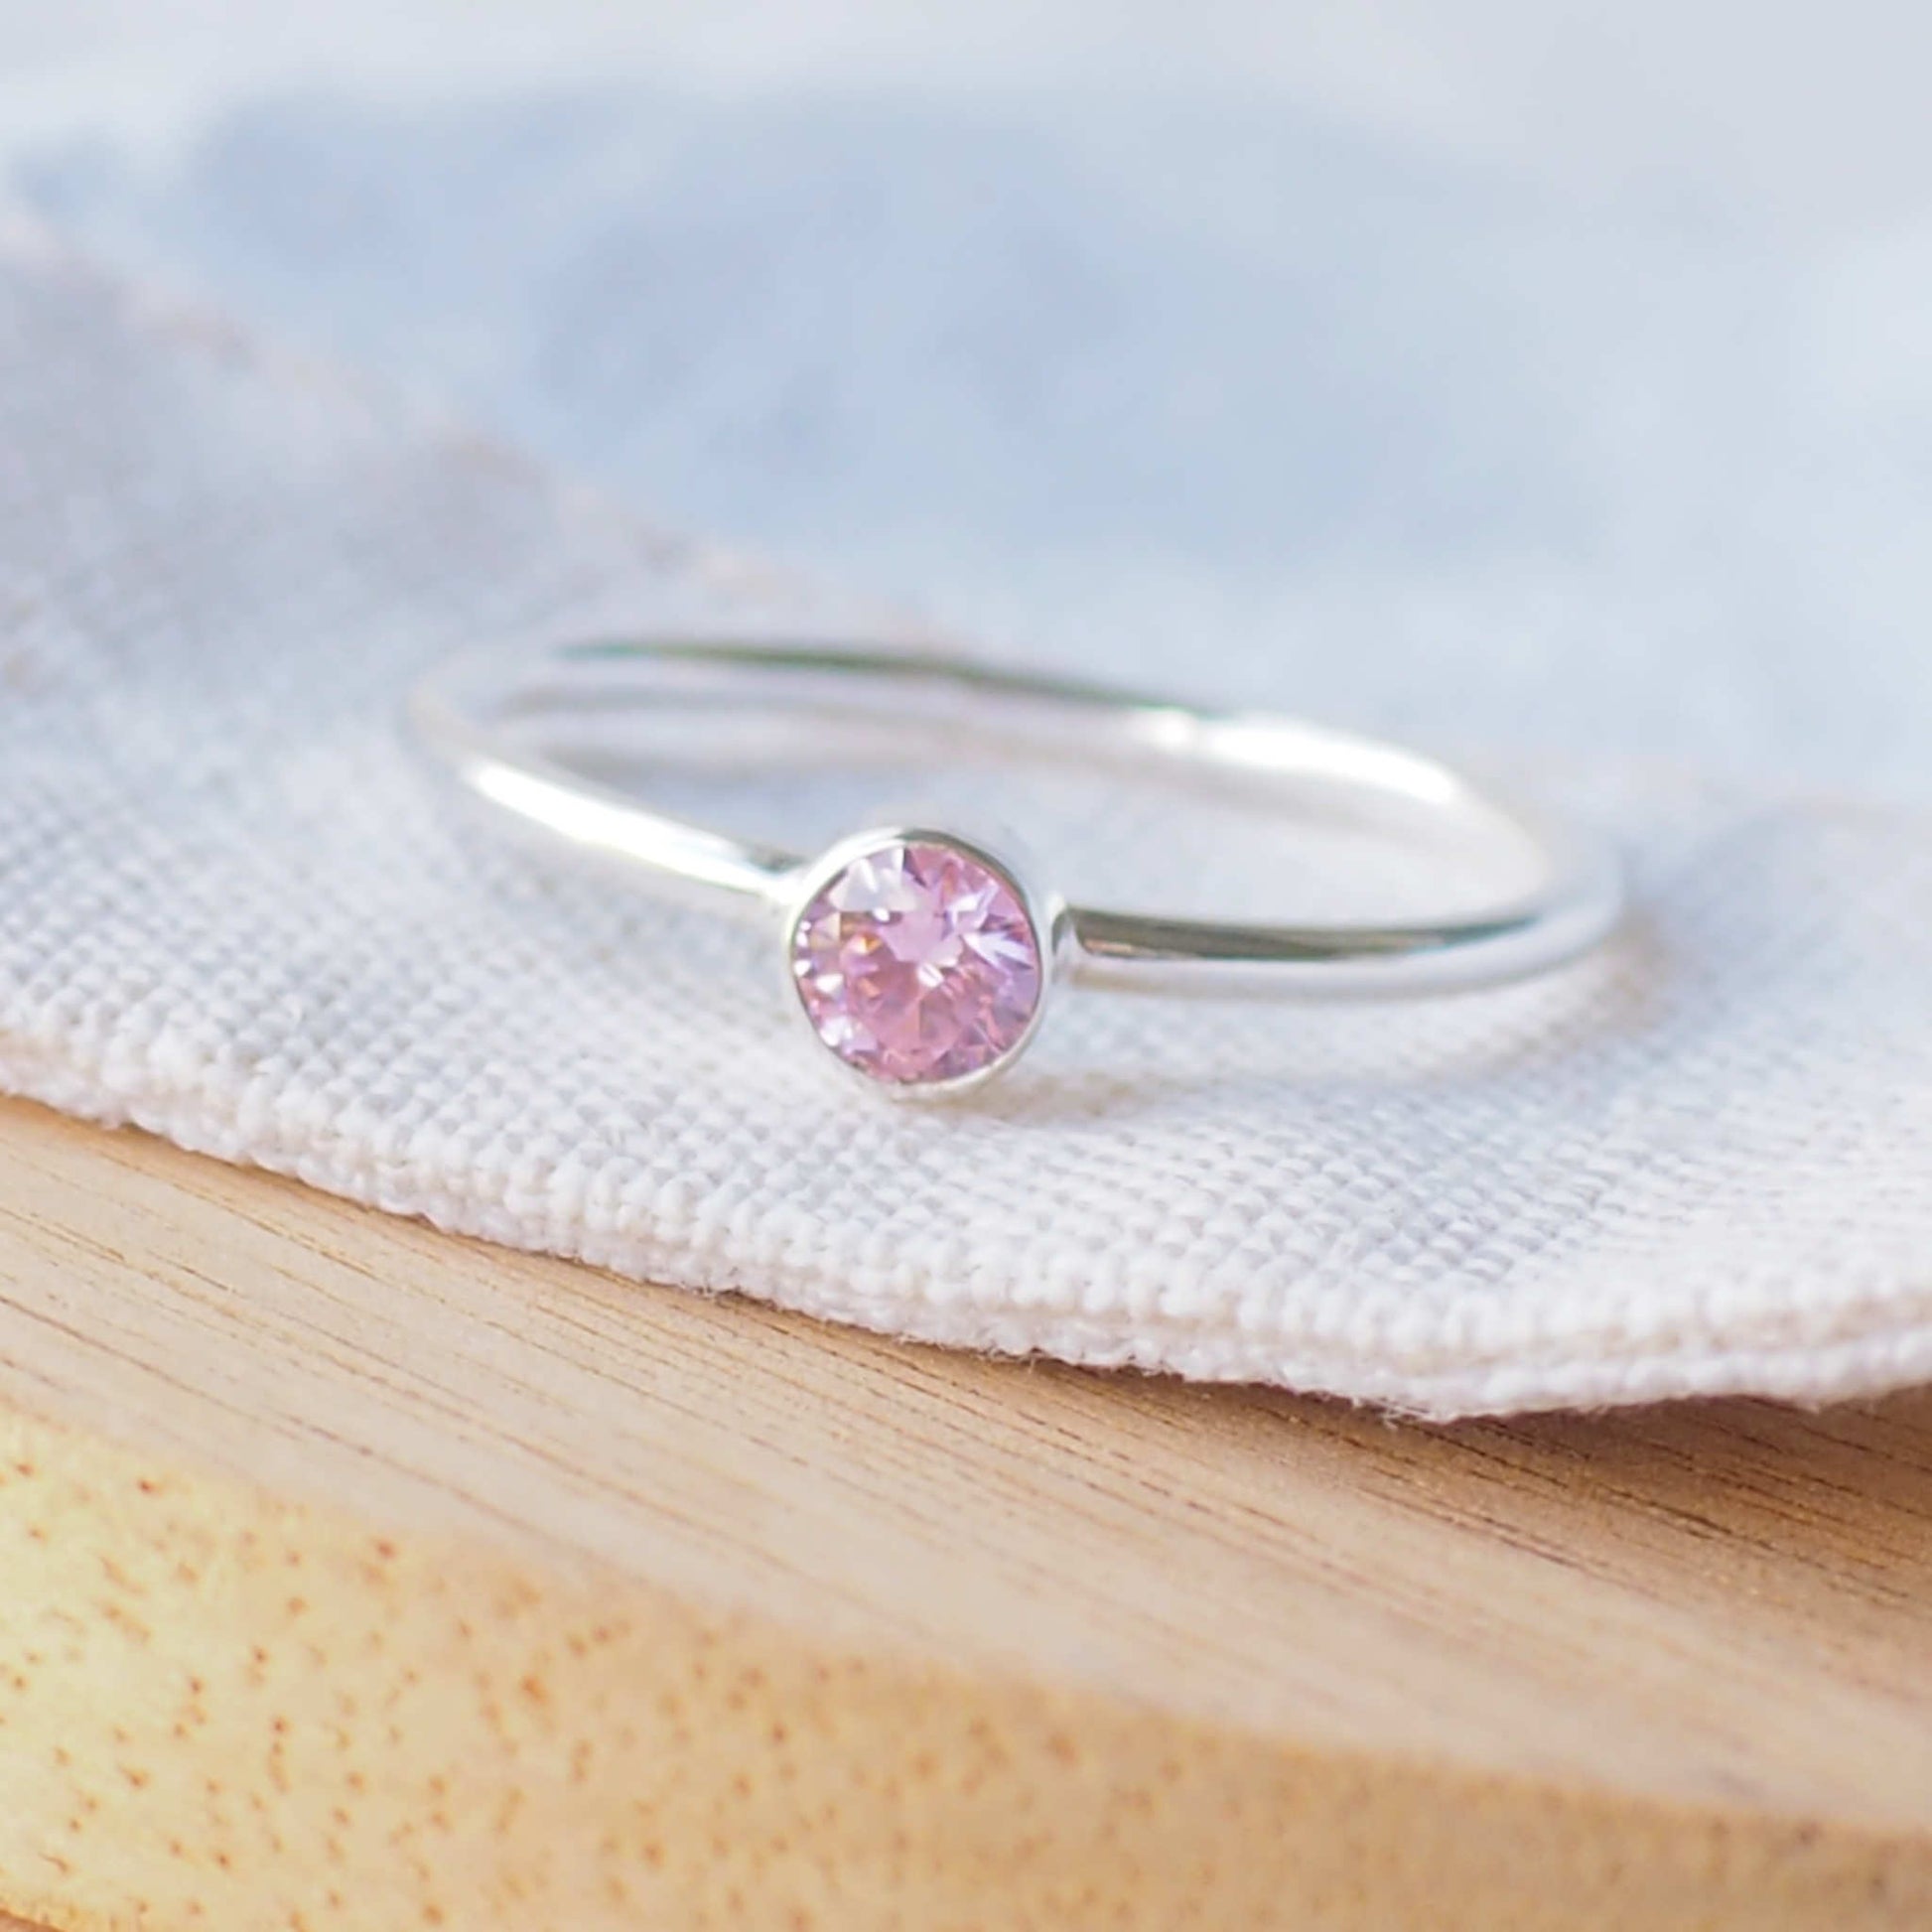 Pale Pink and Silver gemstone ring with a solitaire cubic zirconia on a silver band, The ring is minimalist in style with no decoration with a round 4mm pink gemstone on a fully round band. made in Scotland by maram jewellery